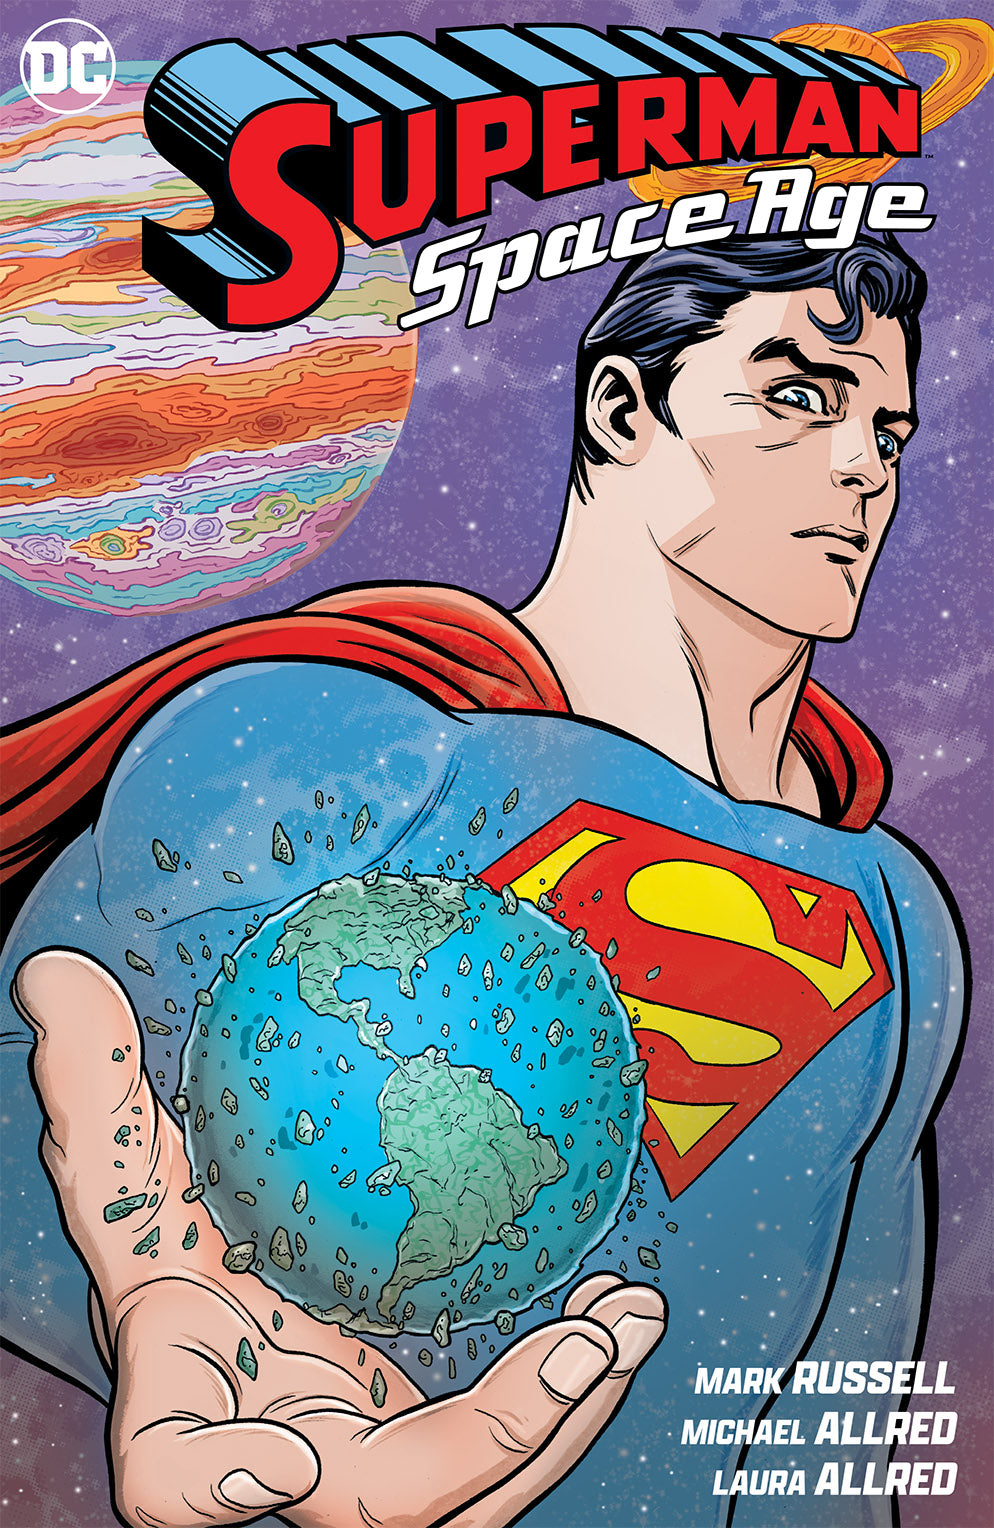 SUPERMAN SPACE AGE HARDCOVER